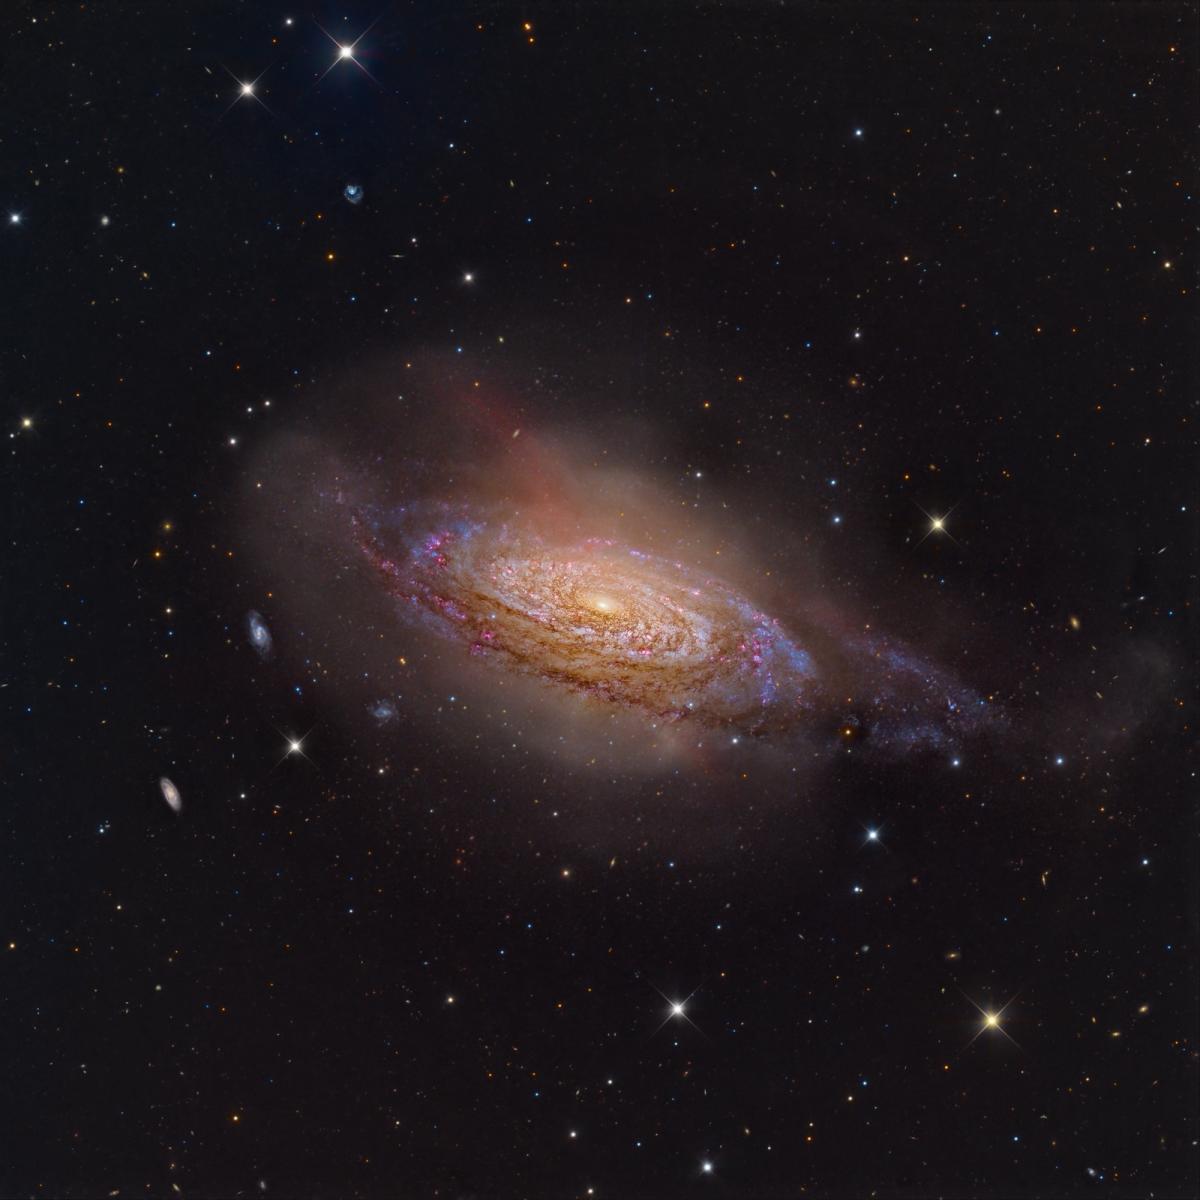 Image of colourful spiral galaxy at an angle